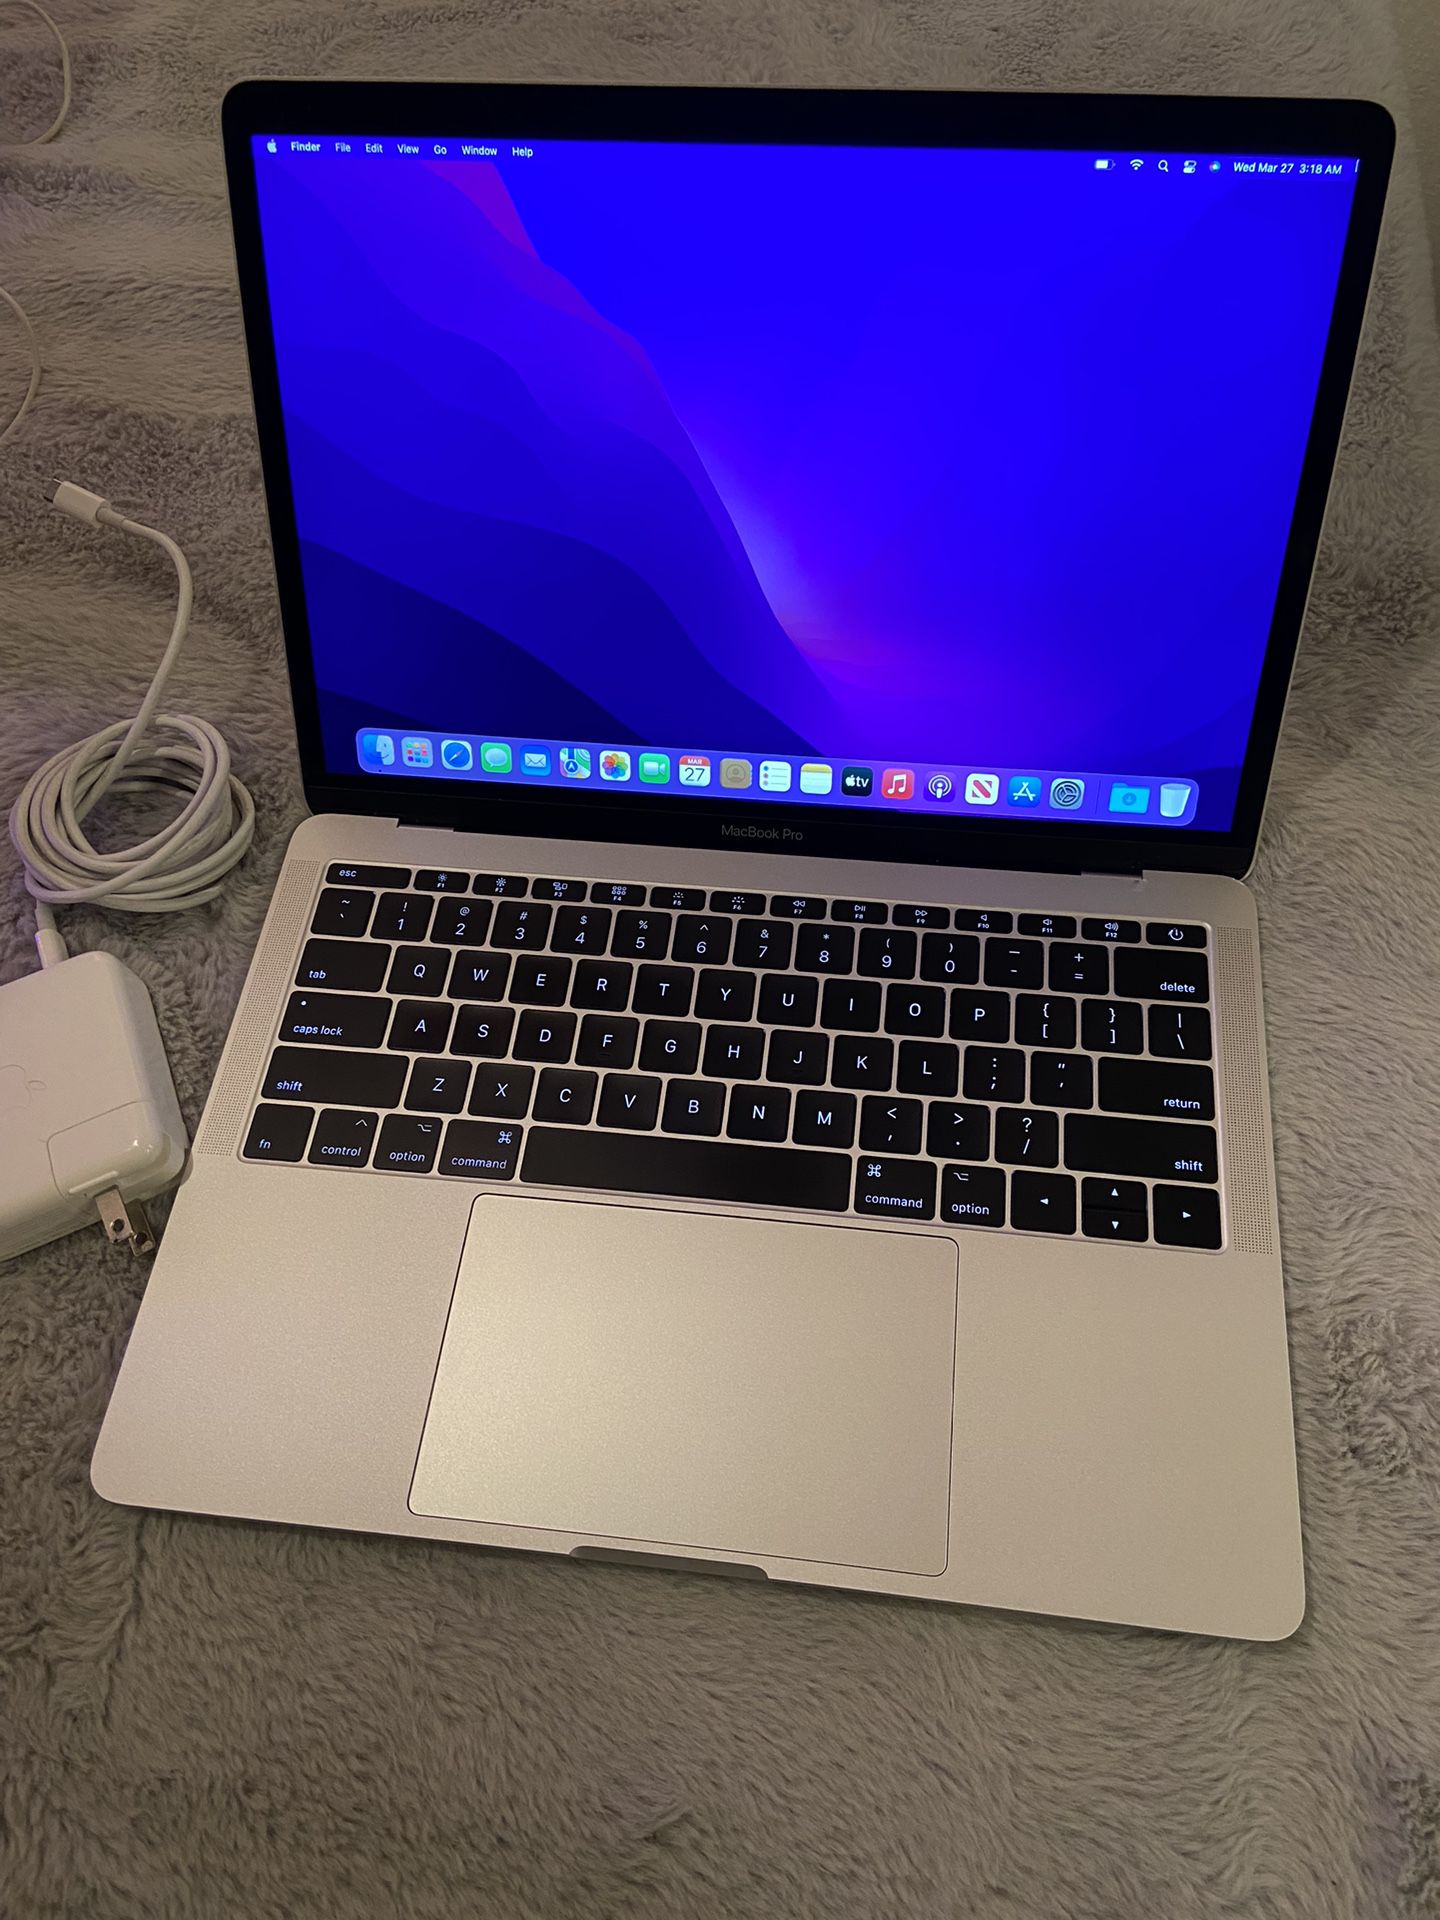 2016 Apple MacBook Pro 13-inch 2GHz i5 256gb Ssd  8gb Ram - Works Great - Good Condition 